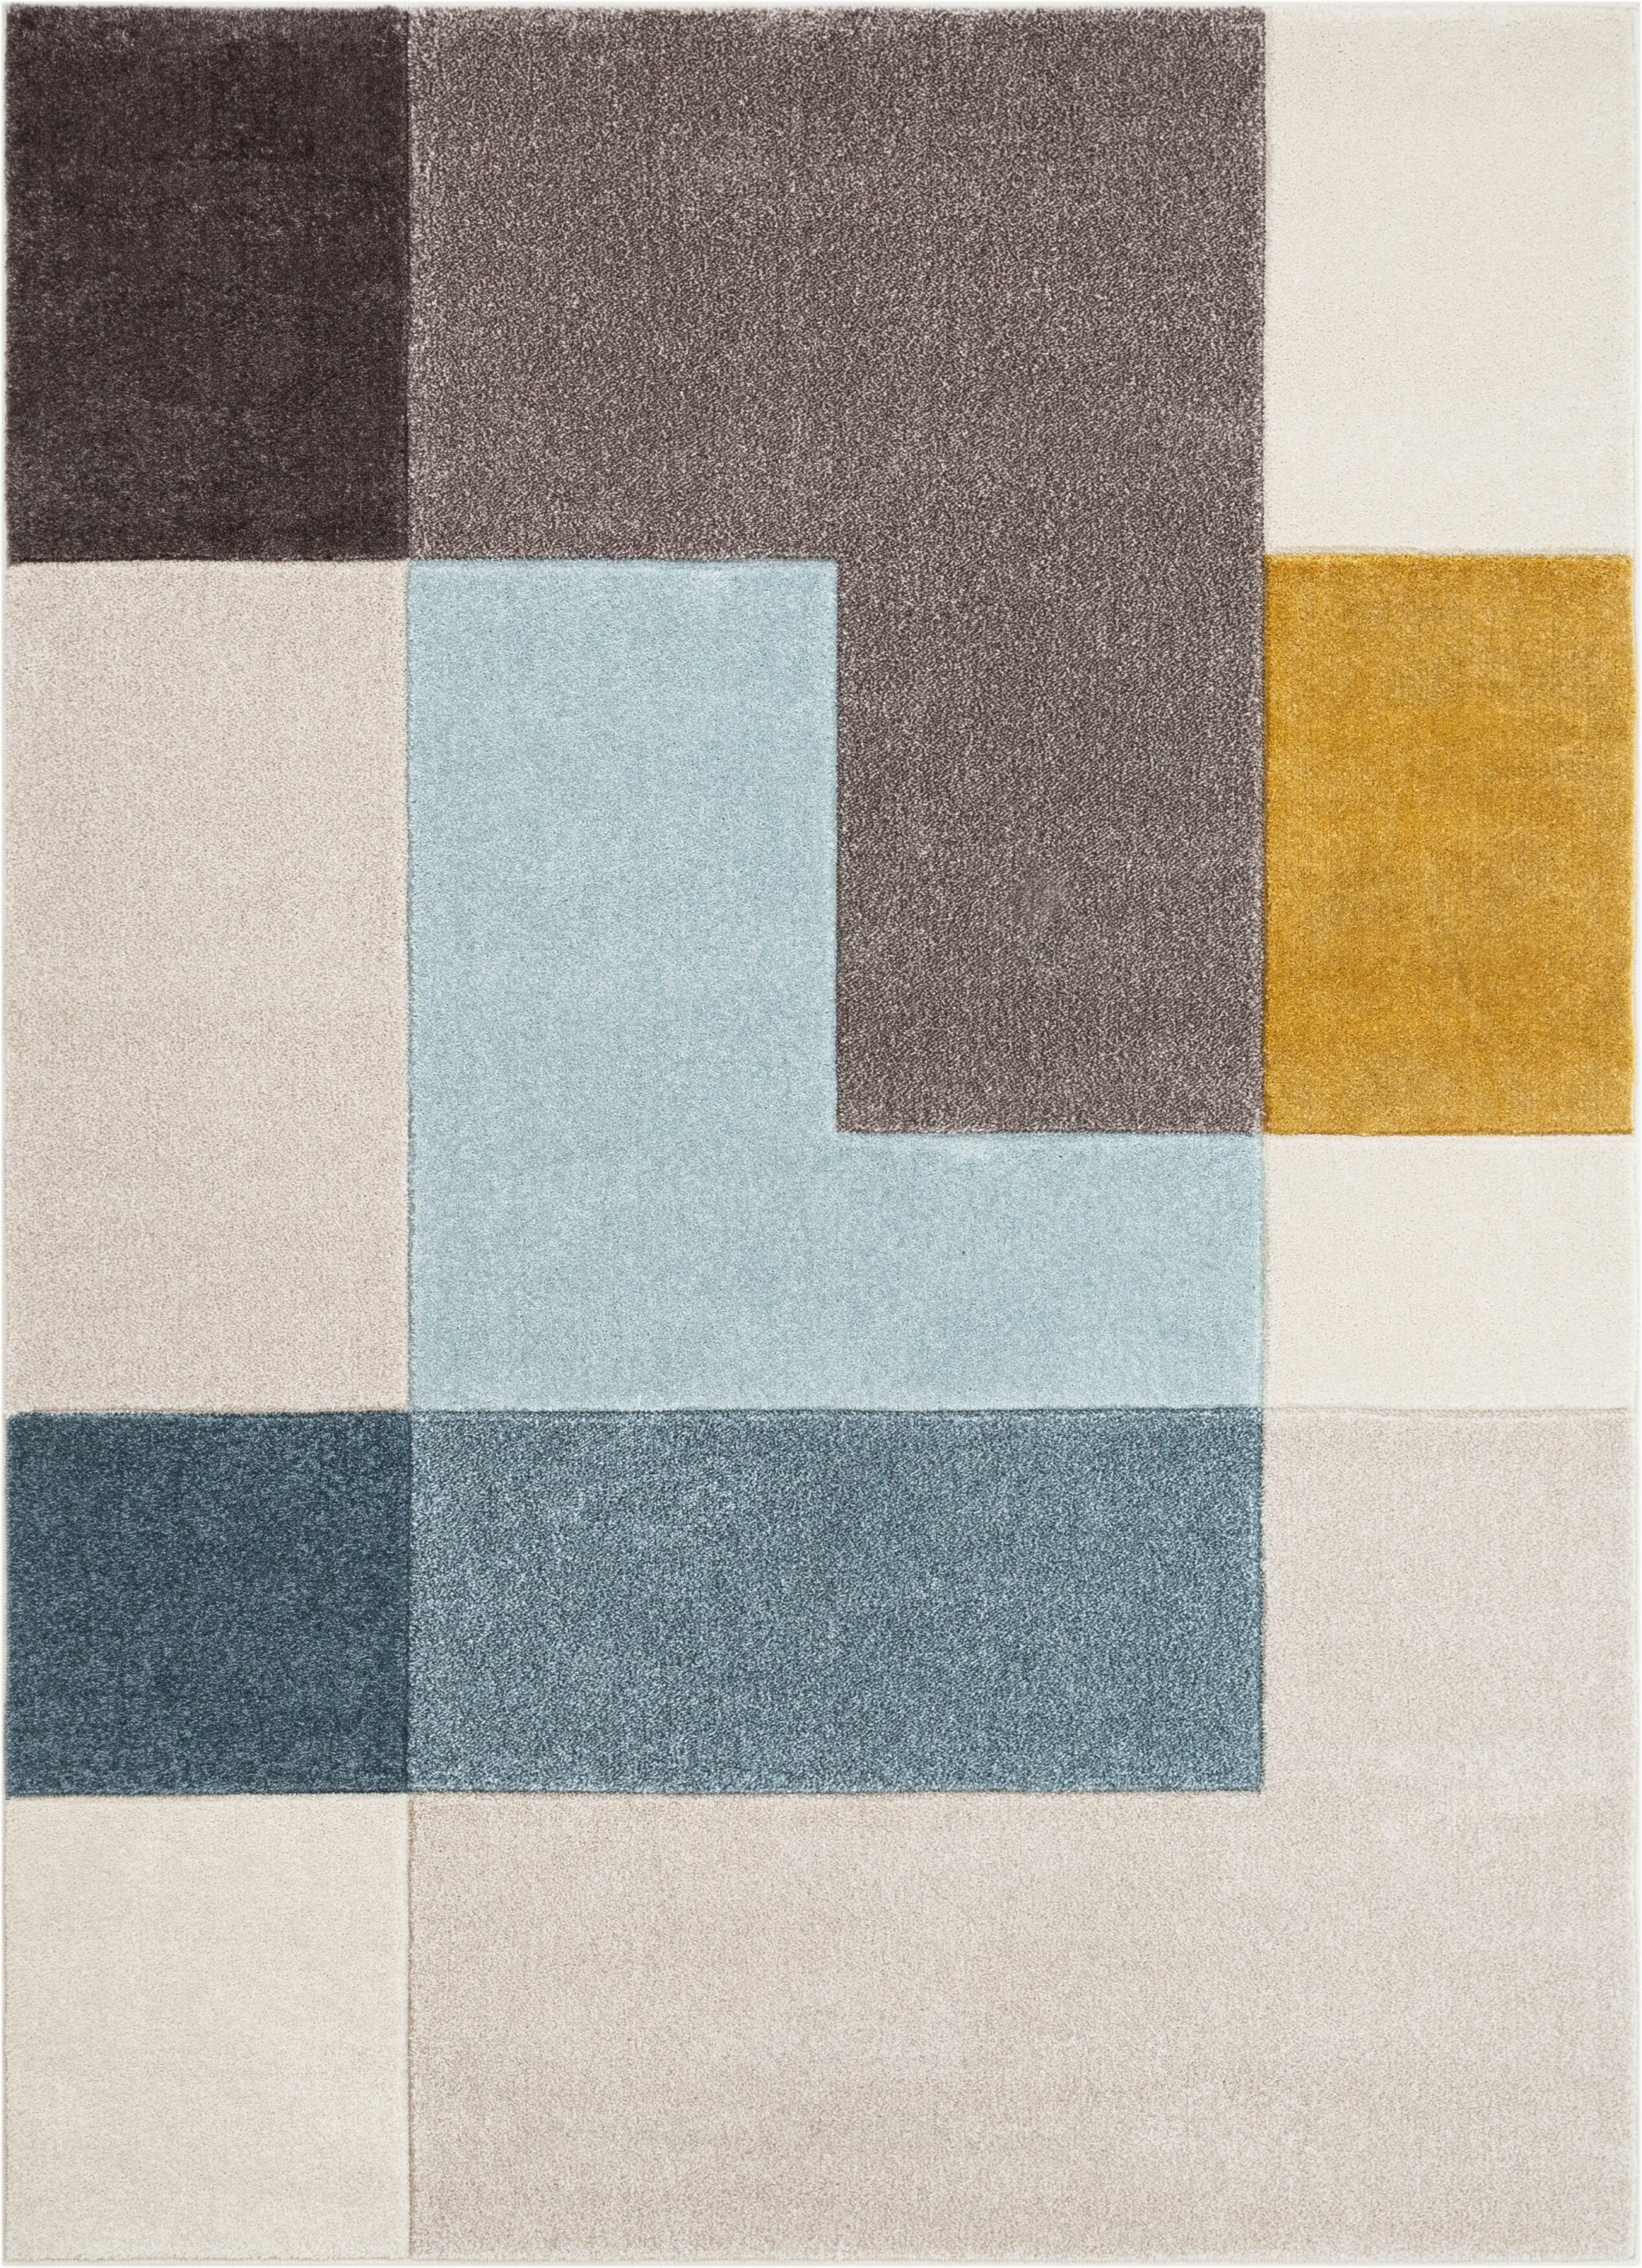 Blue Gray Gold Rug Ruby Constance Mid Century Modern Geometric Squares Gray Gold Mint Blue area Rug